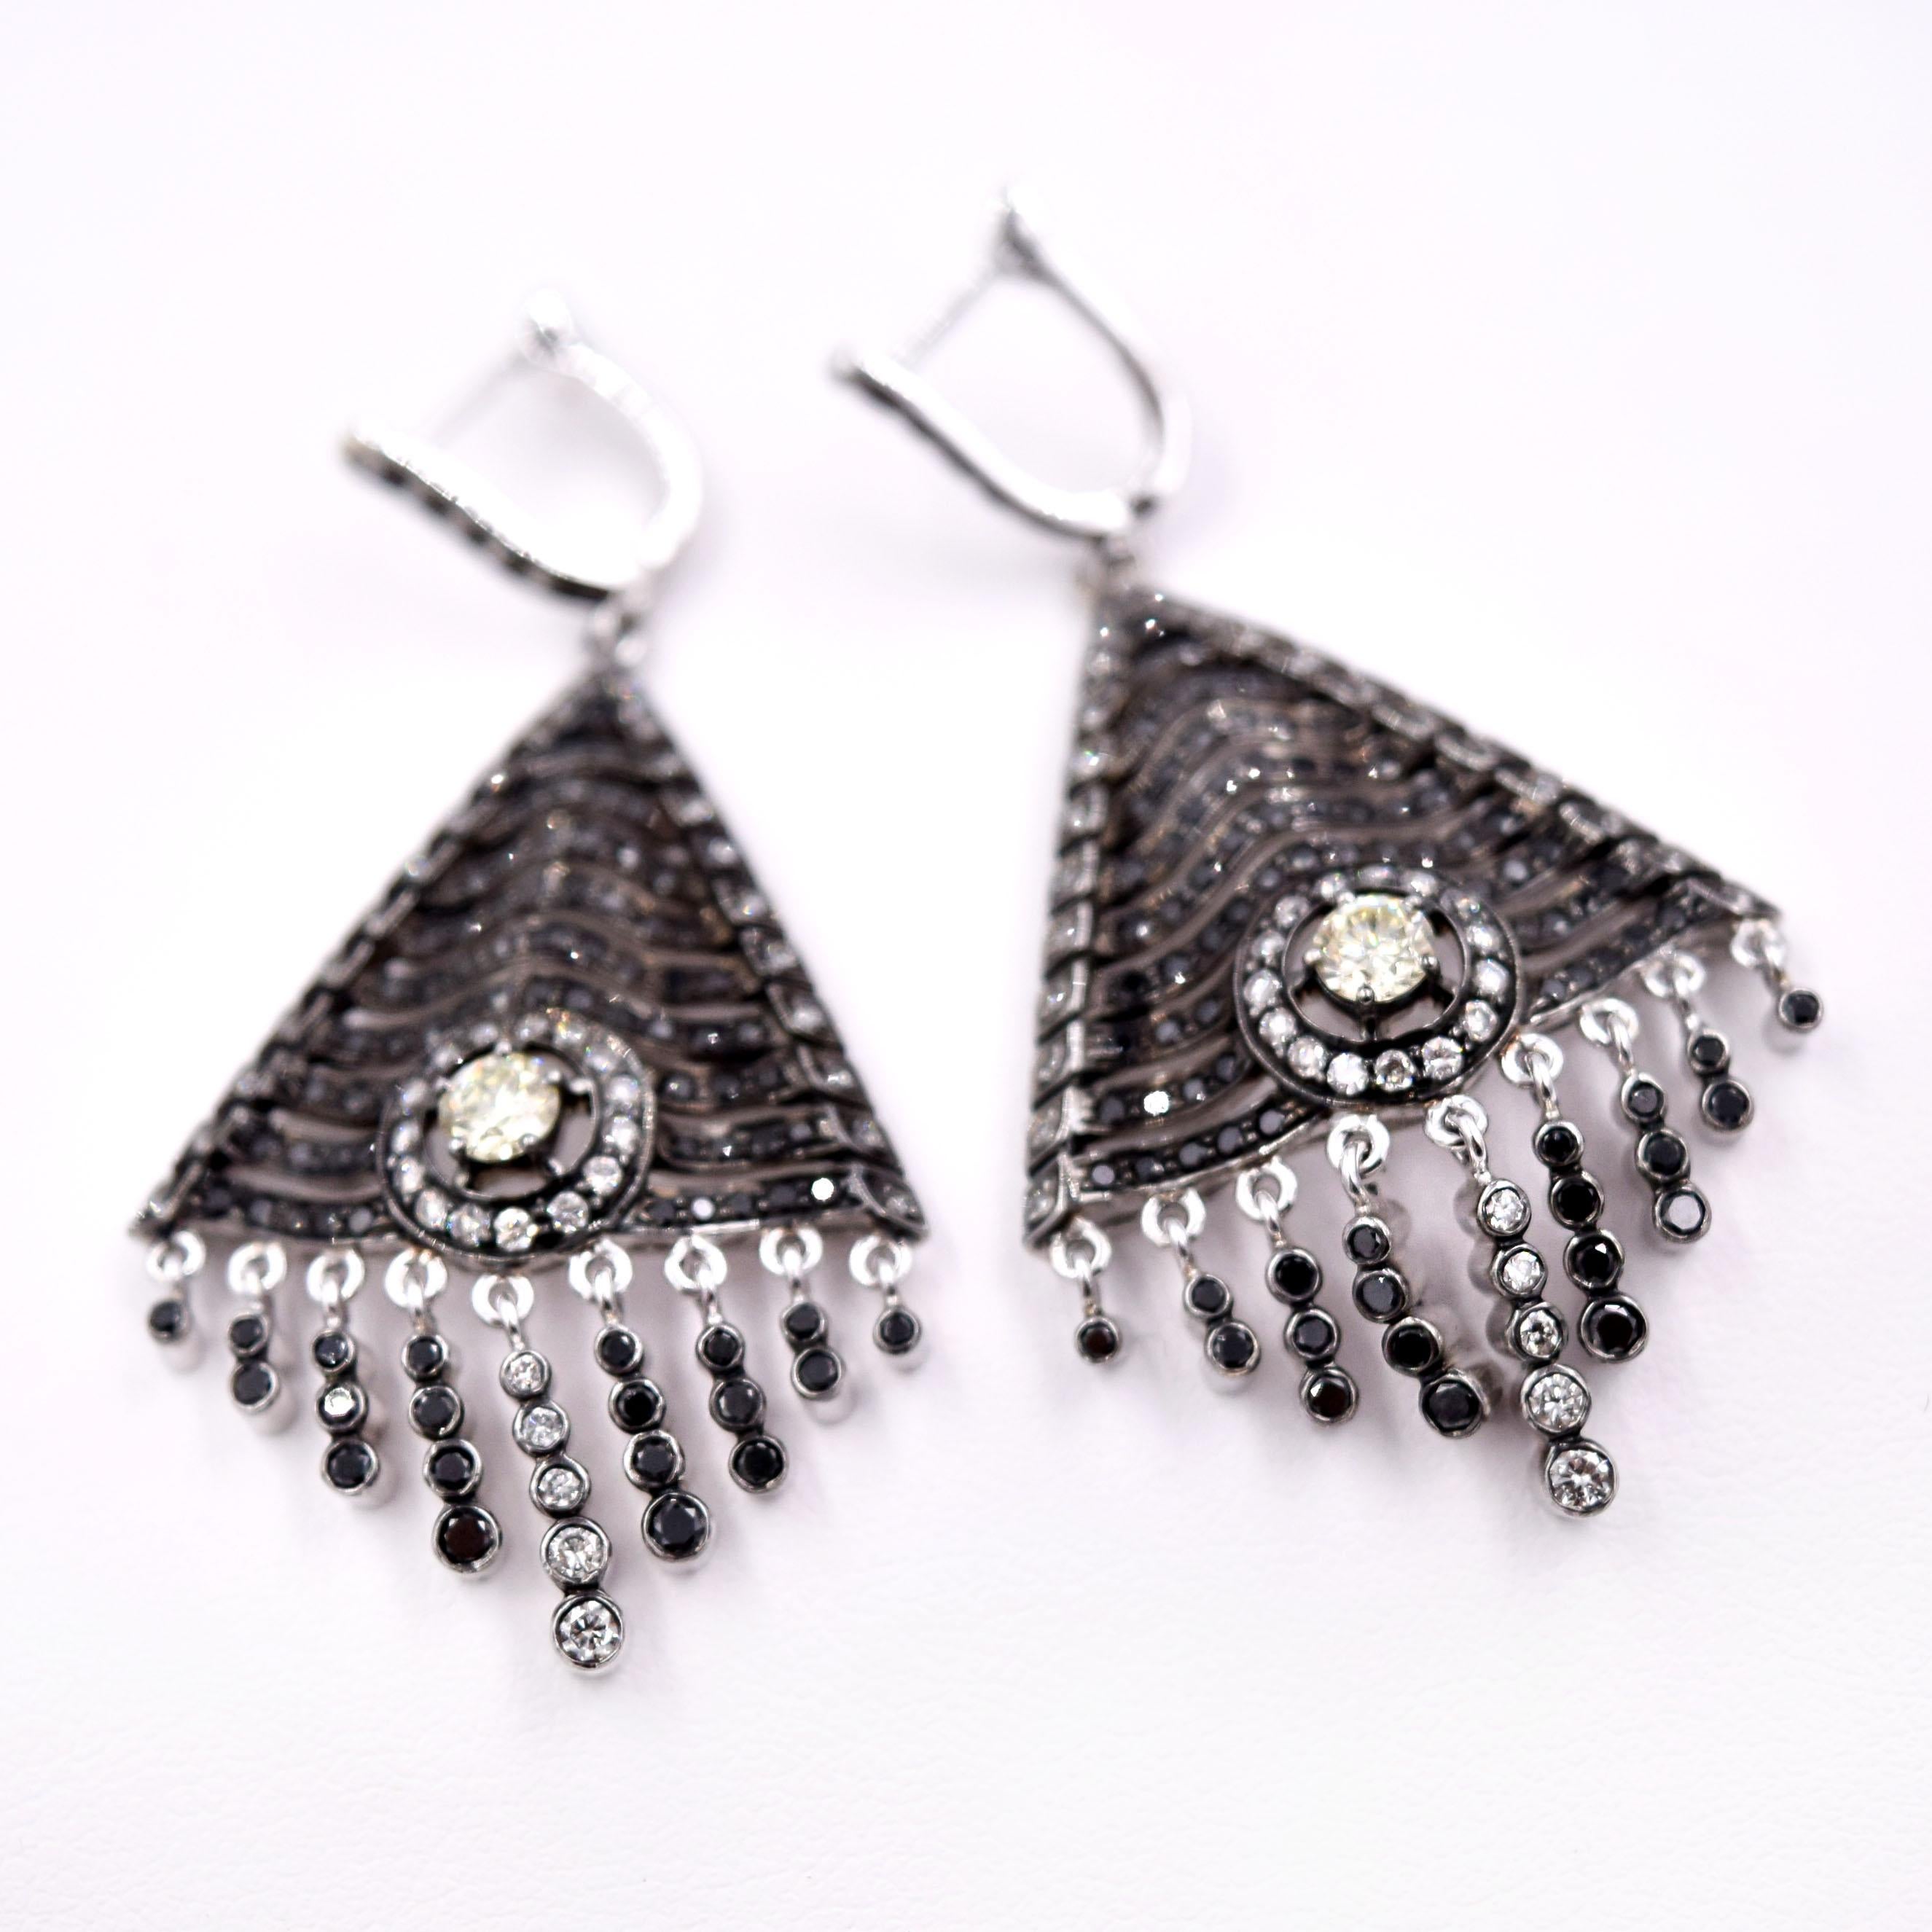 Vintage inspired Black and White Diamond Tassel Earrings designed by Sethi Couture.
3.44 Carats of white and black diamonds are set in 18 Karat white gold and black rhodium accents.
Length of the earring is 2.26